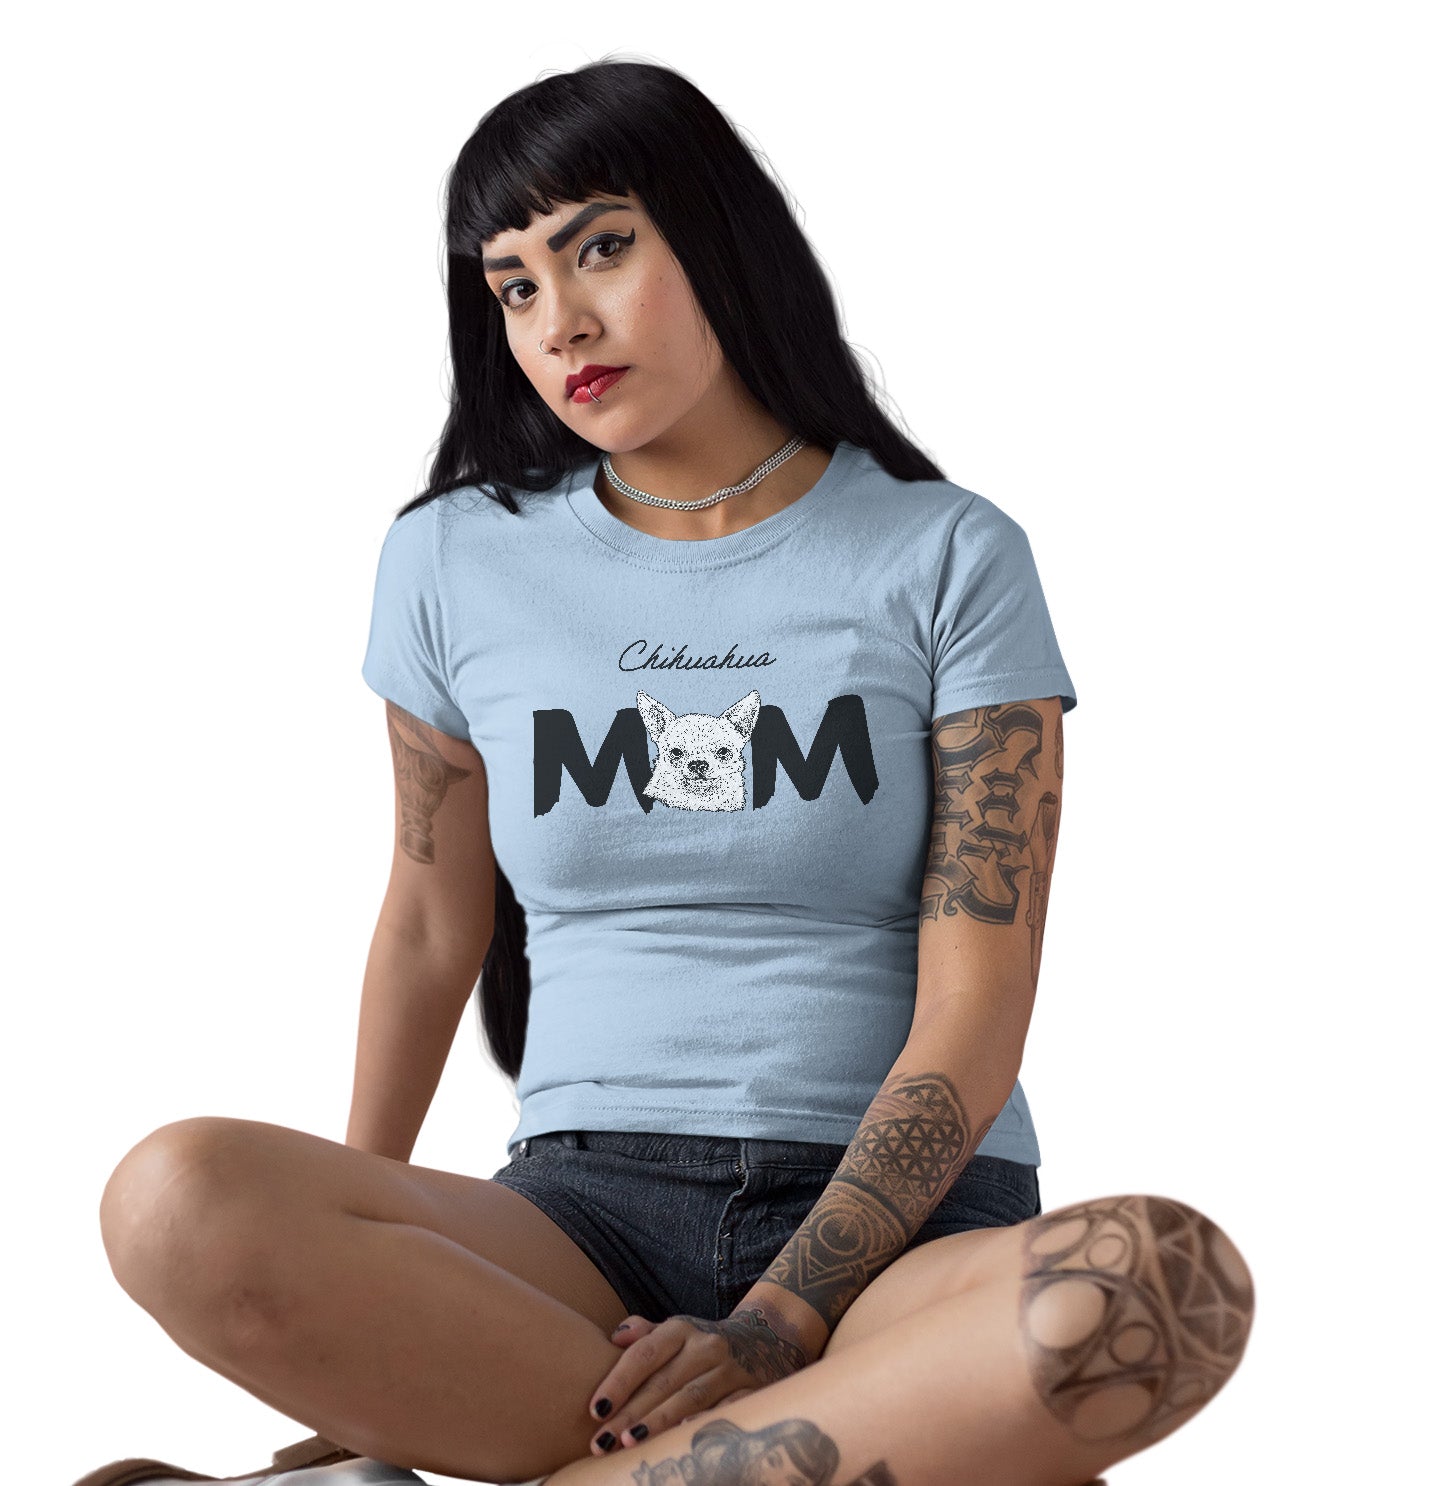 Chihuahua Breed Mom - Women's Fitted T-Shirt